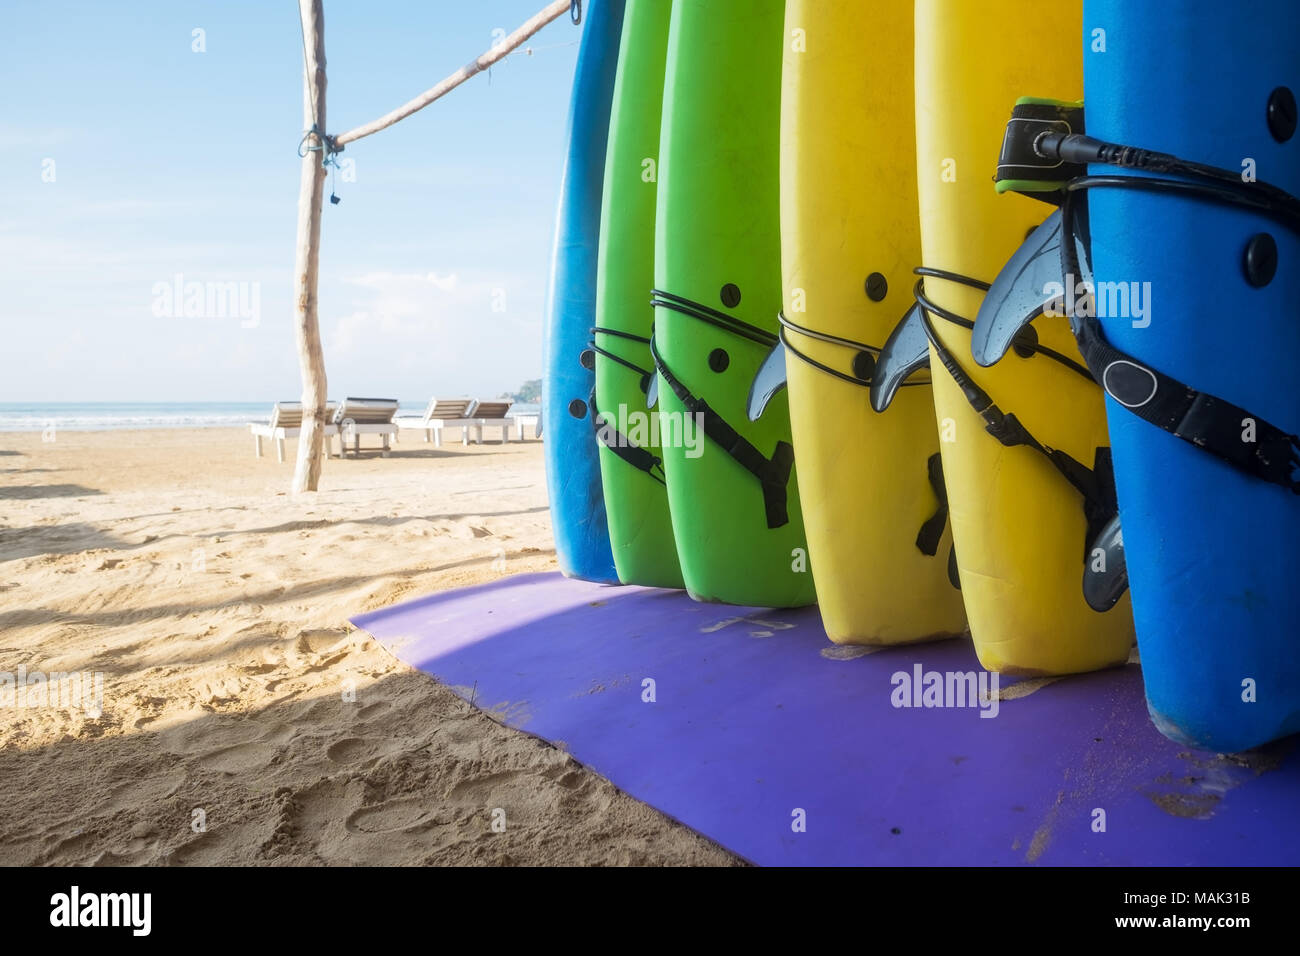 Several long boards for surfing standing on beach in the morning. Concept of active sport during vacation Stock Photo